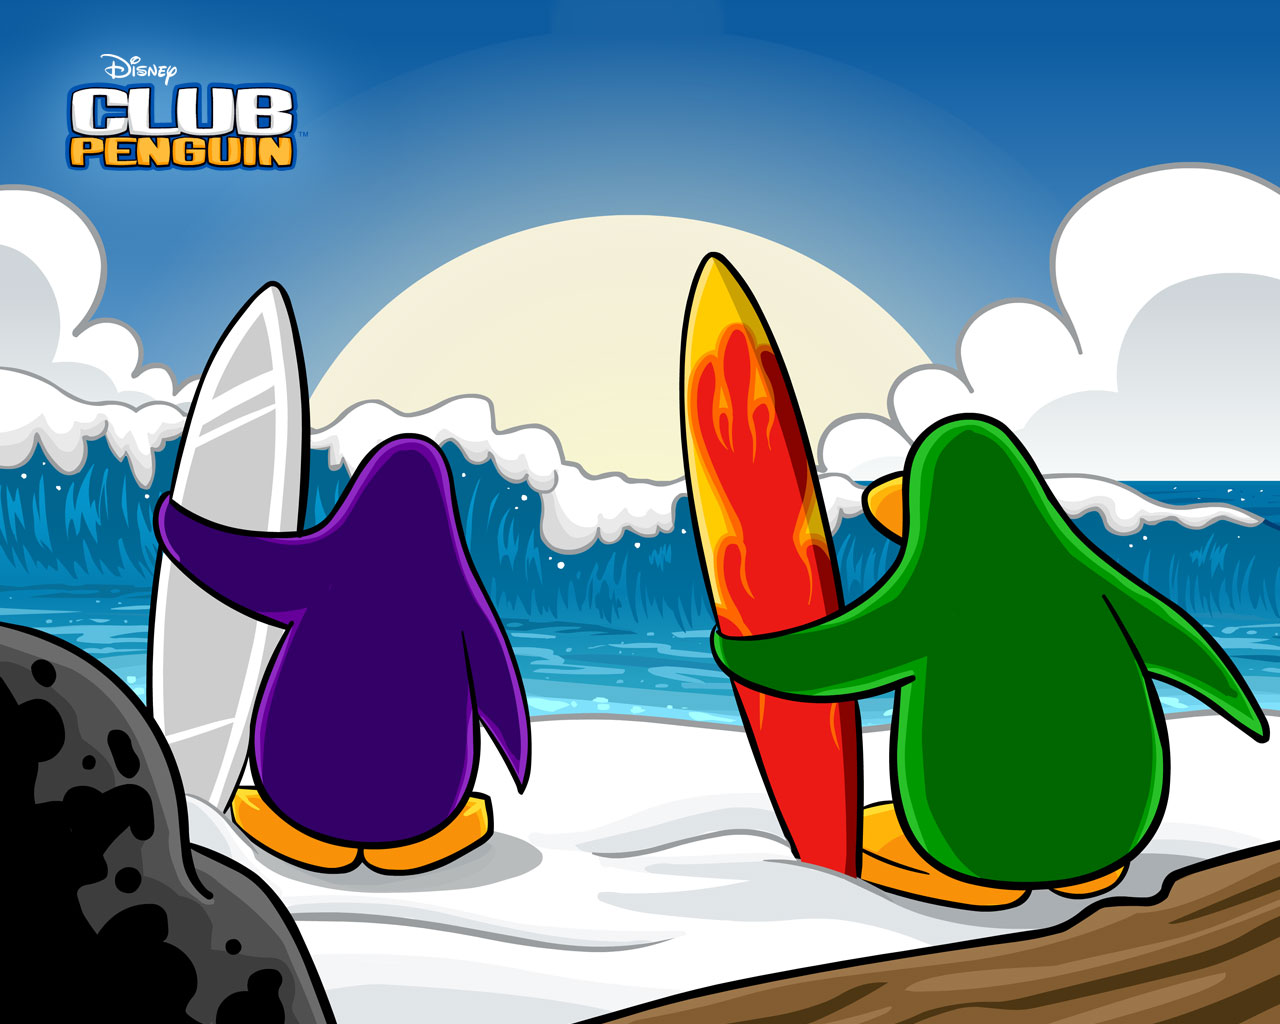  Penguin Wallpapers page. You can also go there for more Club 